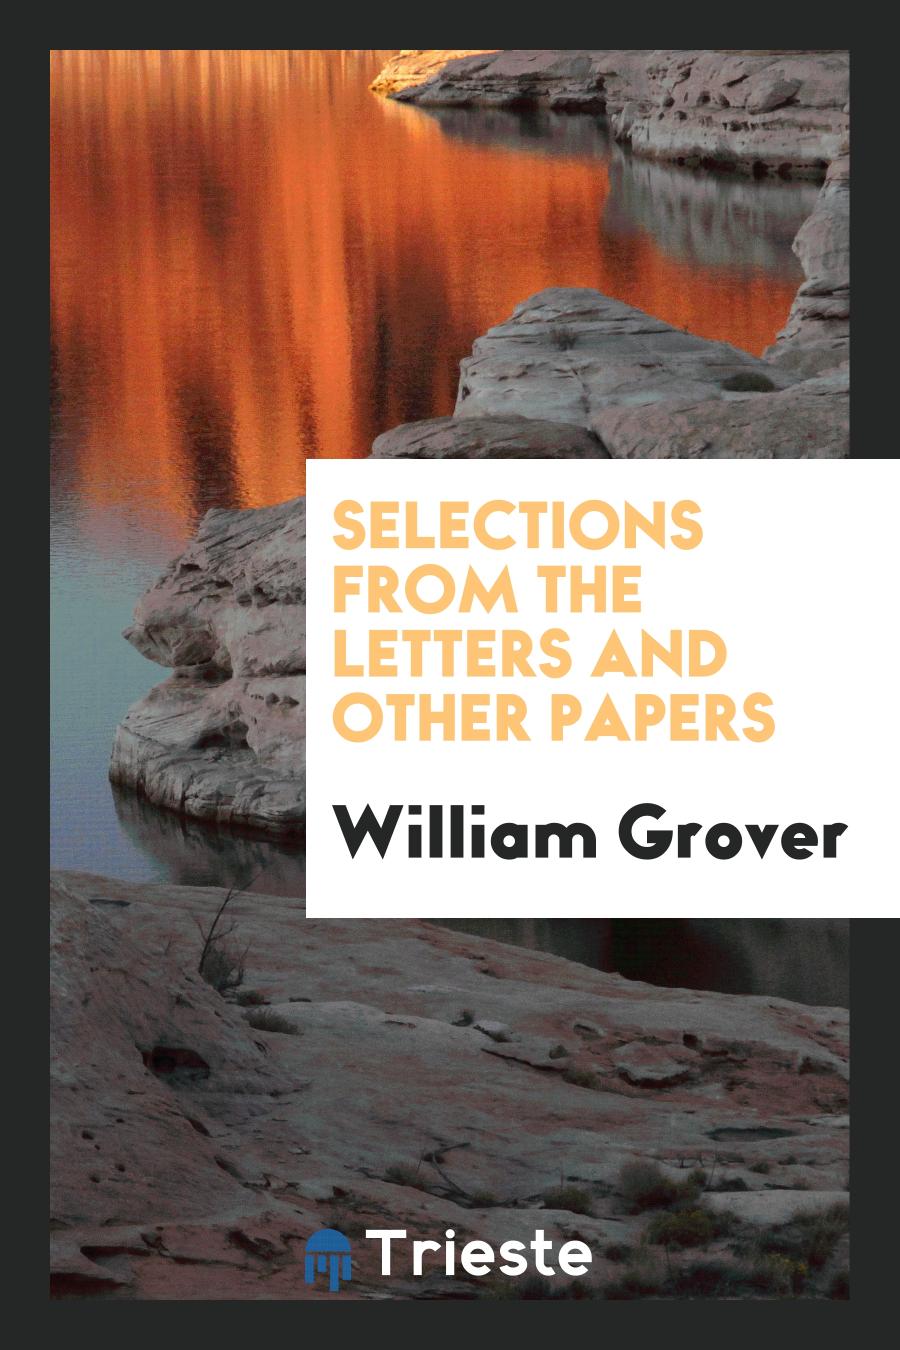 Selections from the Letters and Other Papers